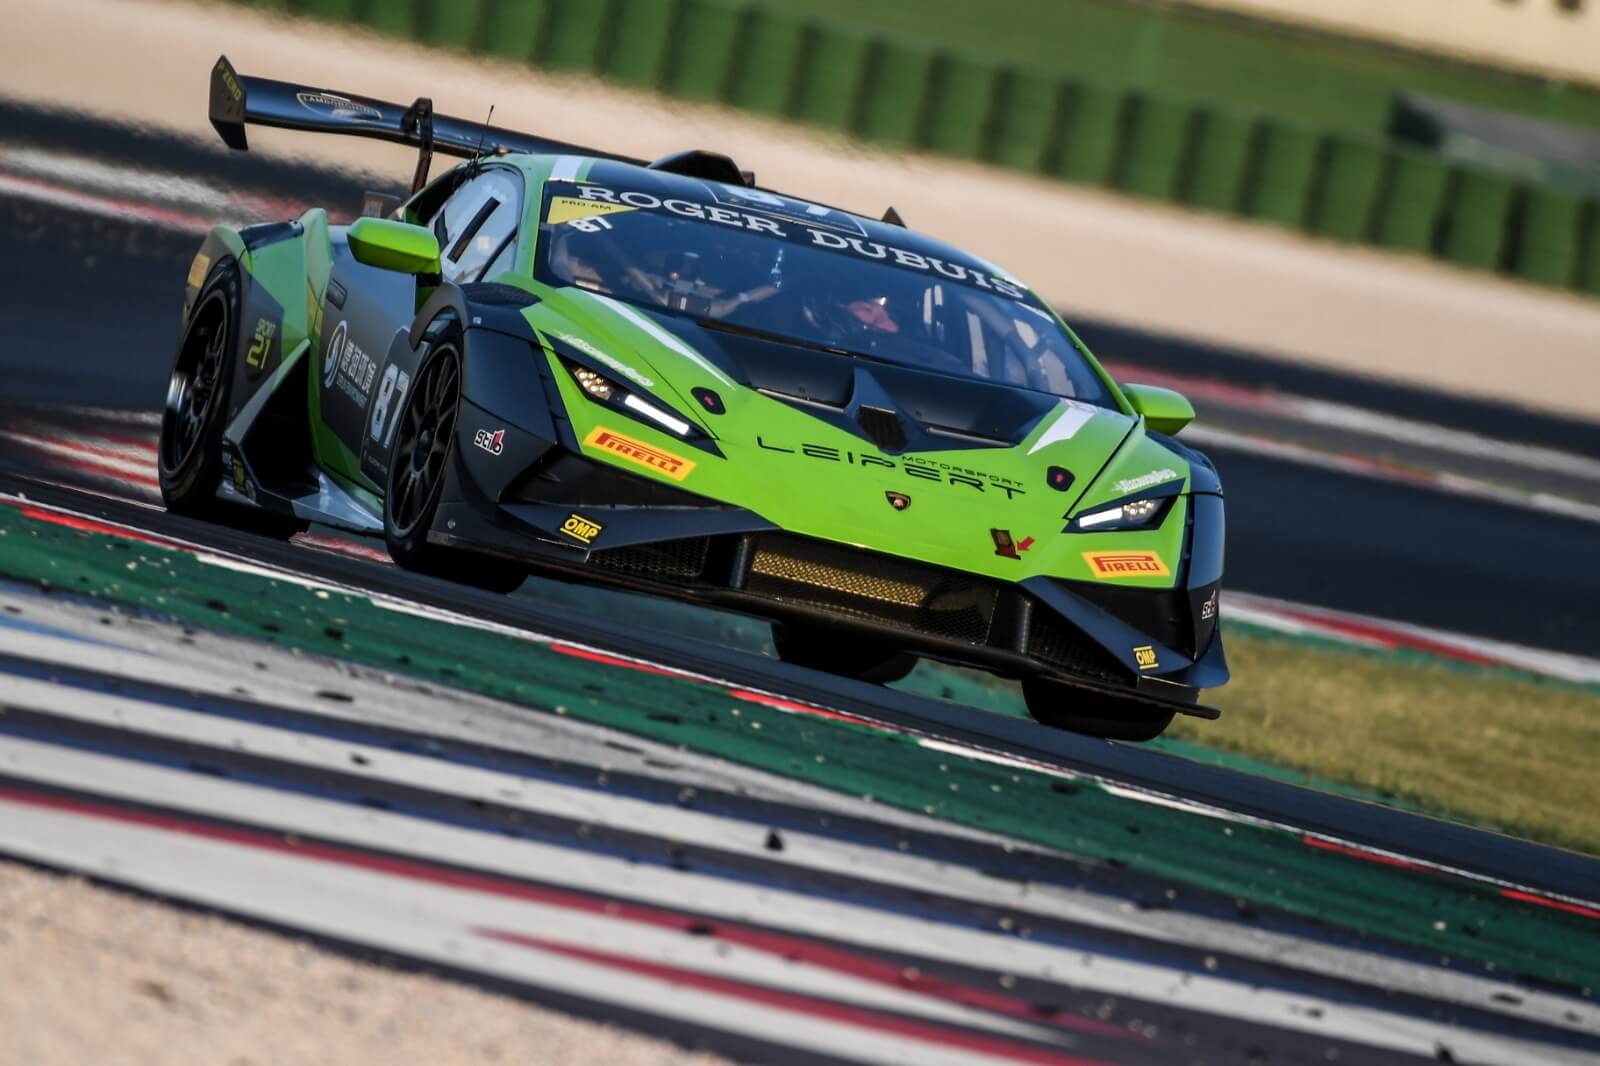 TOP FOUR PRO-AM BEST IN SUPER TROFEO FOR LI AND BRUNOT AT MISANO